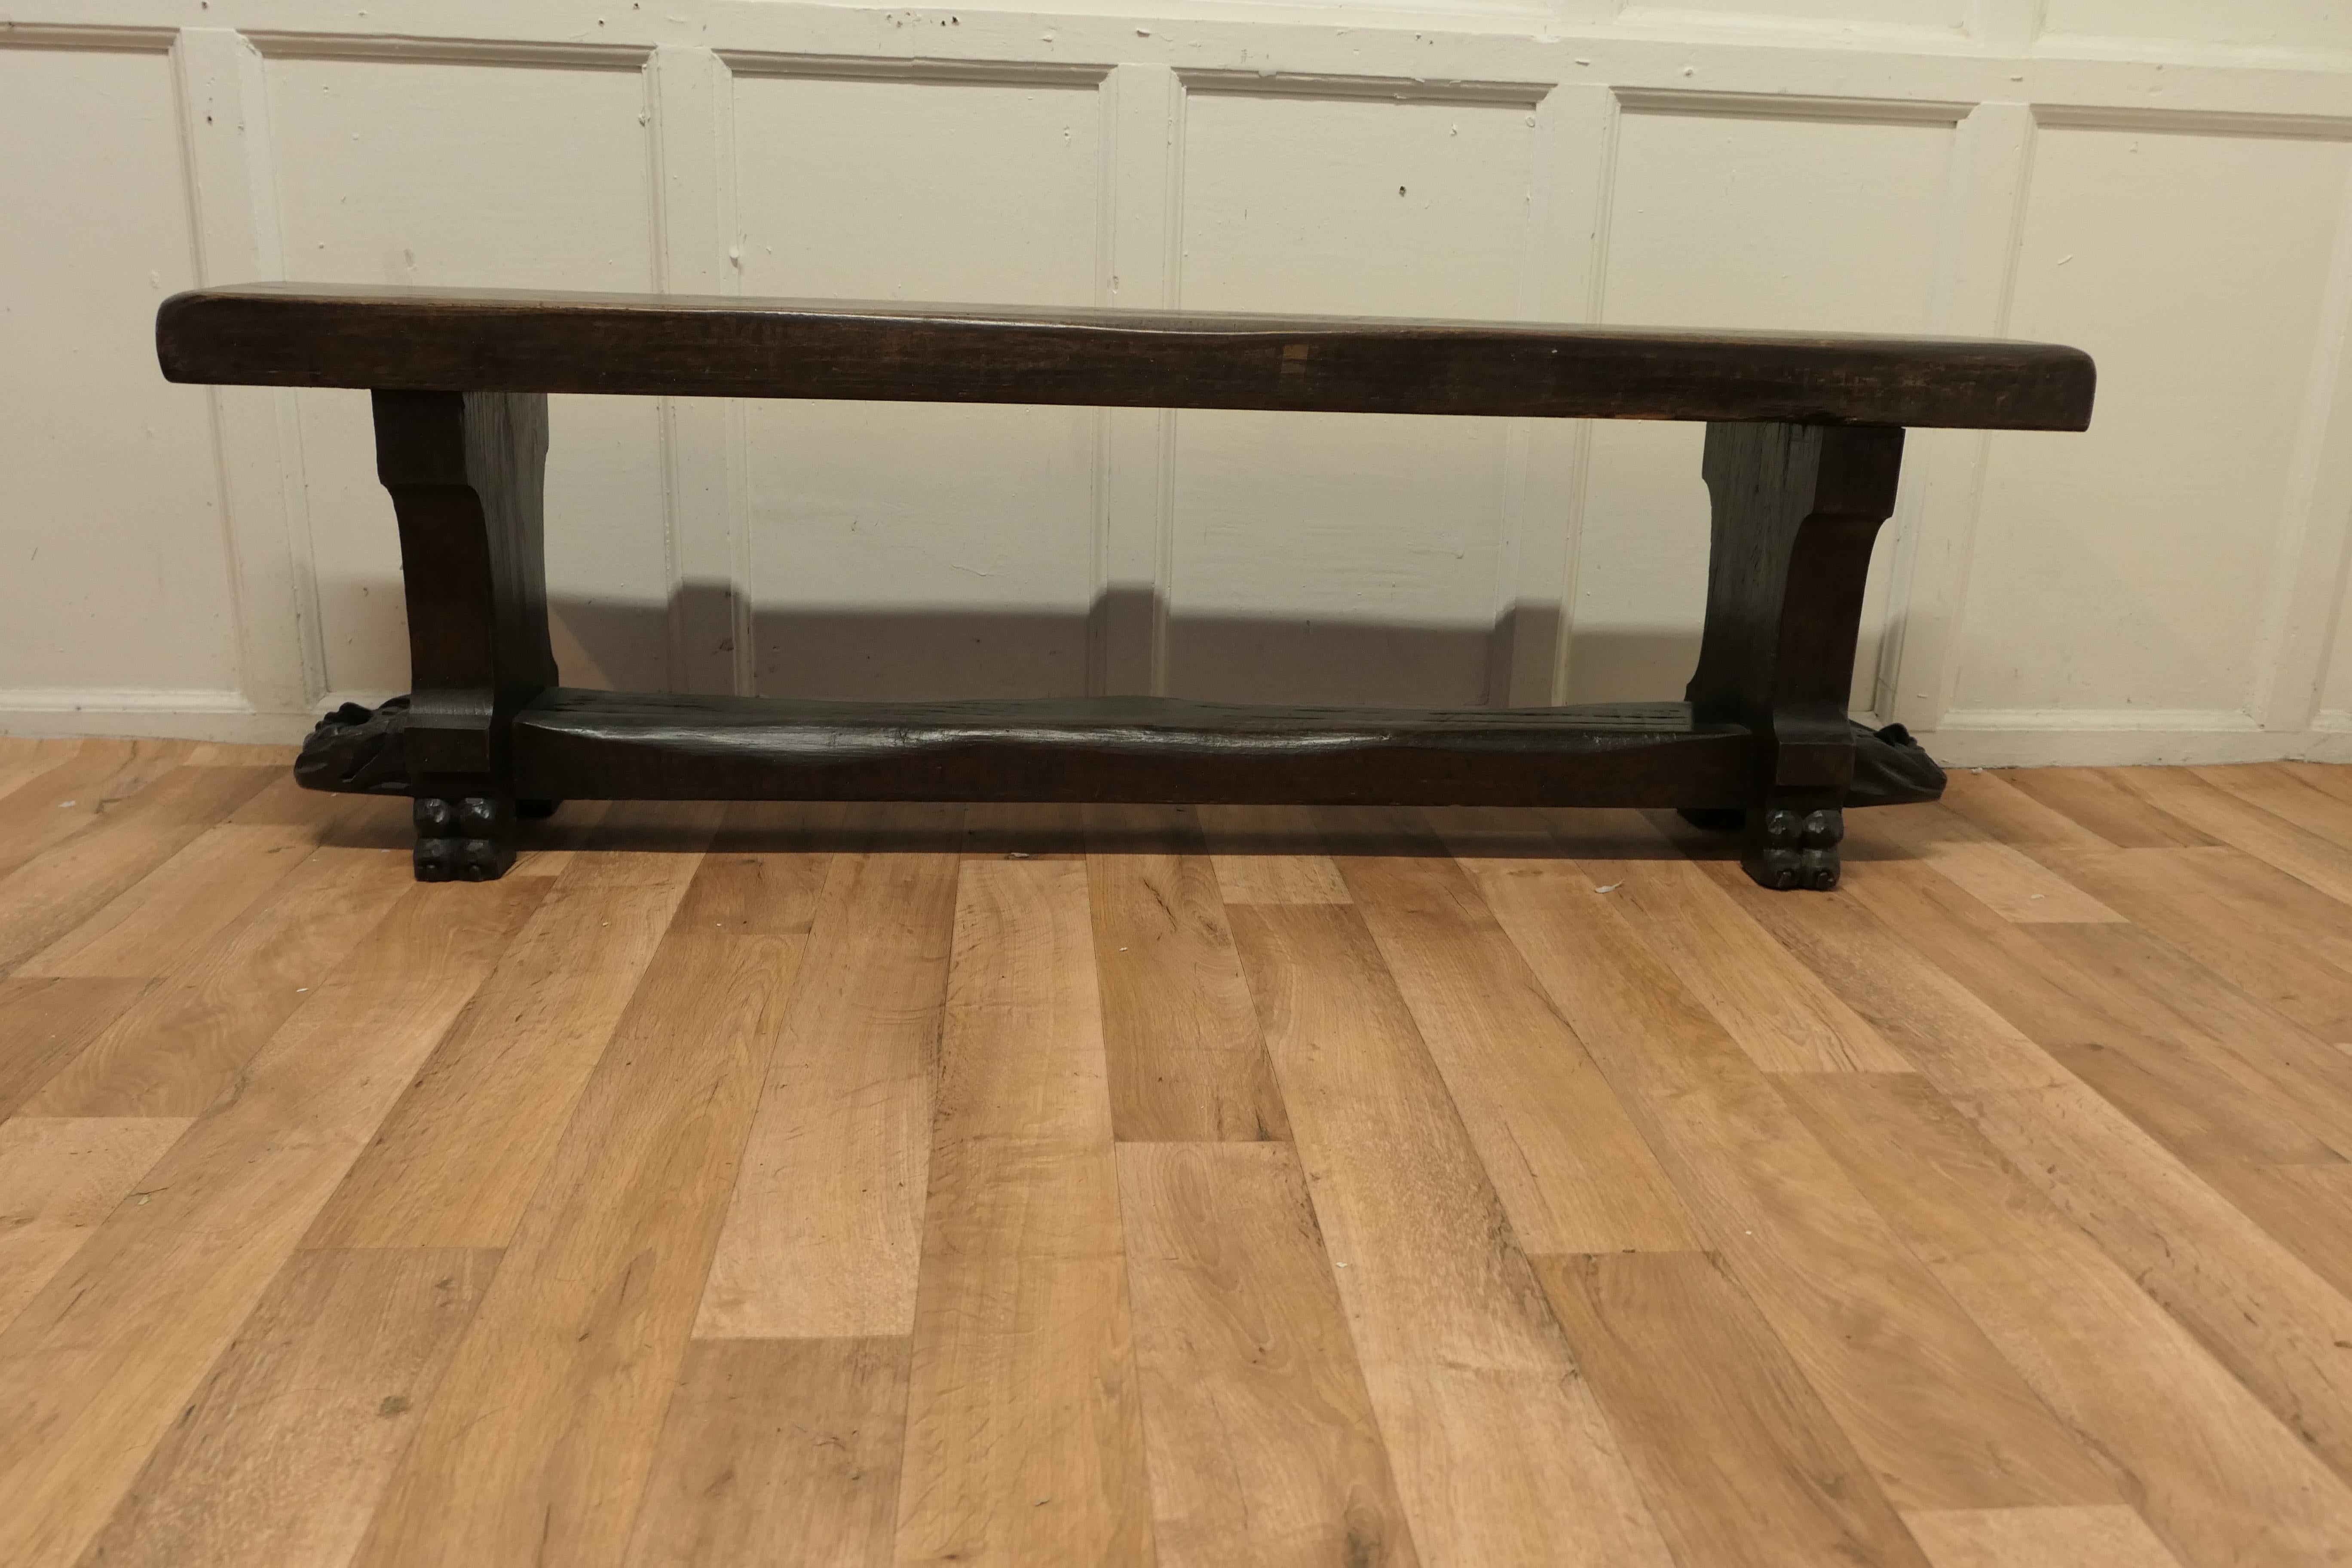 A pair of French Gothic oak monastery benches.

These heavy benches are made in Solid oak the seats are 3” thick and the carved stretchers are 5” wide, each of the ends of the stretchers are individually carved with the face of a medieval monk